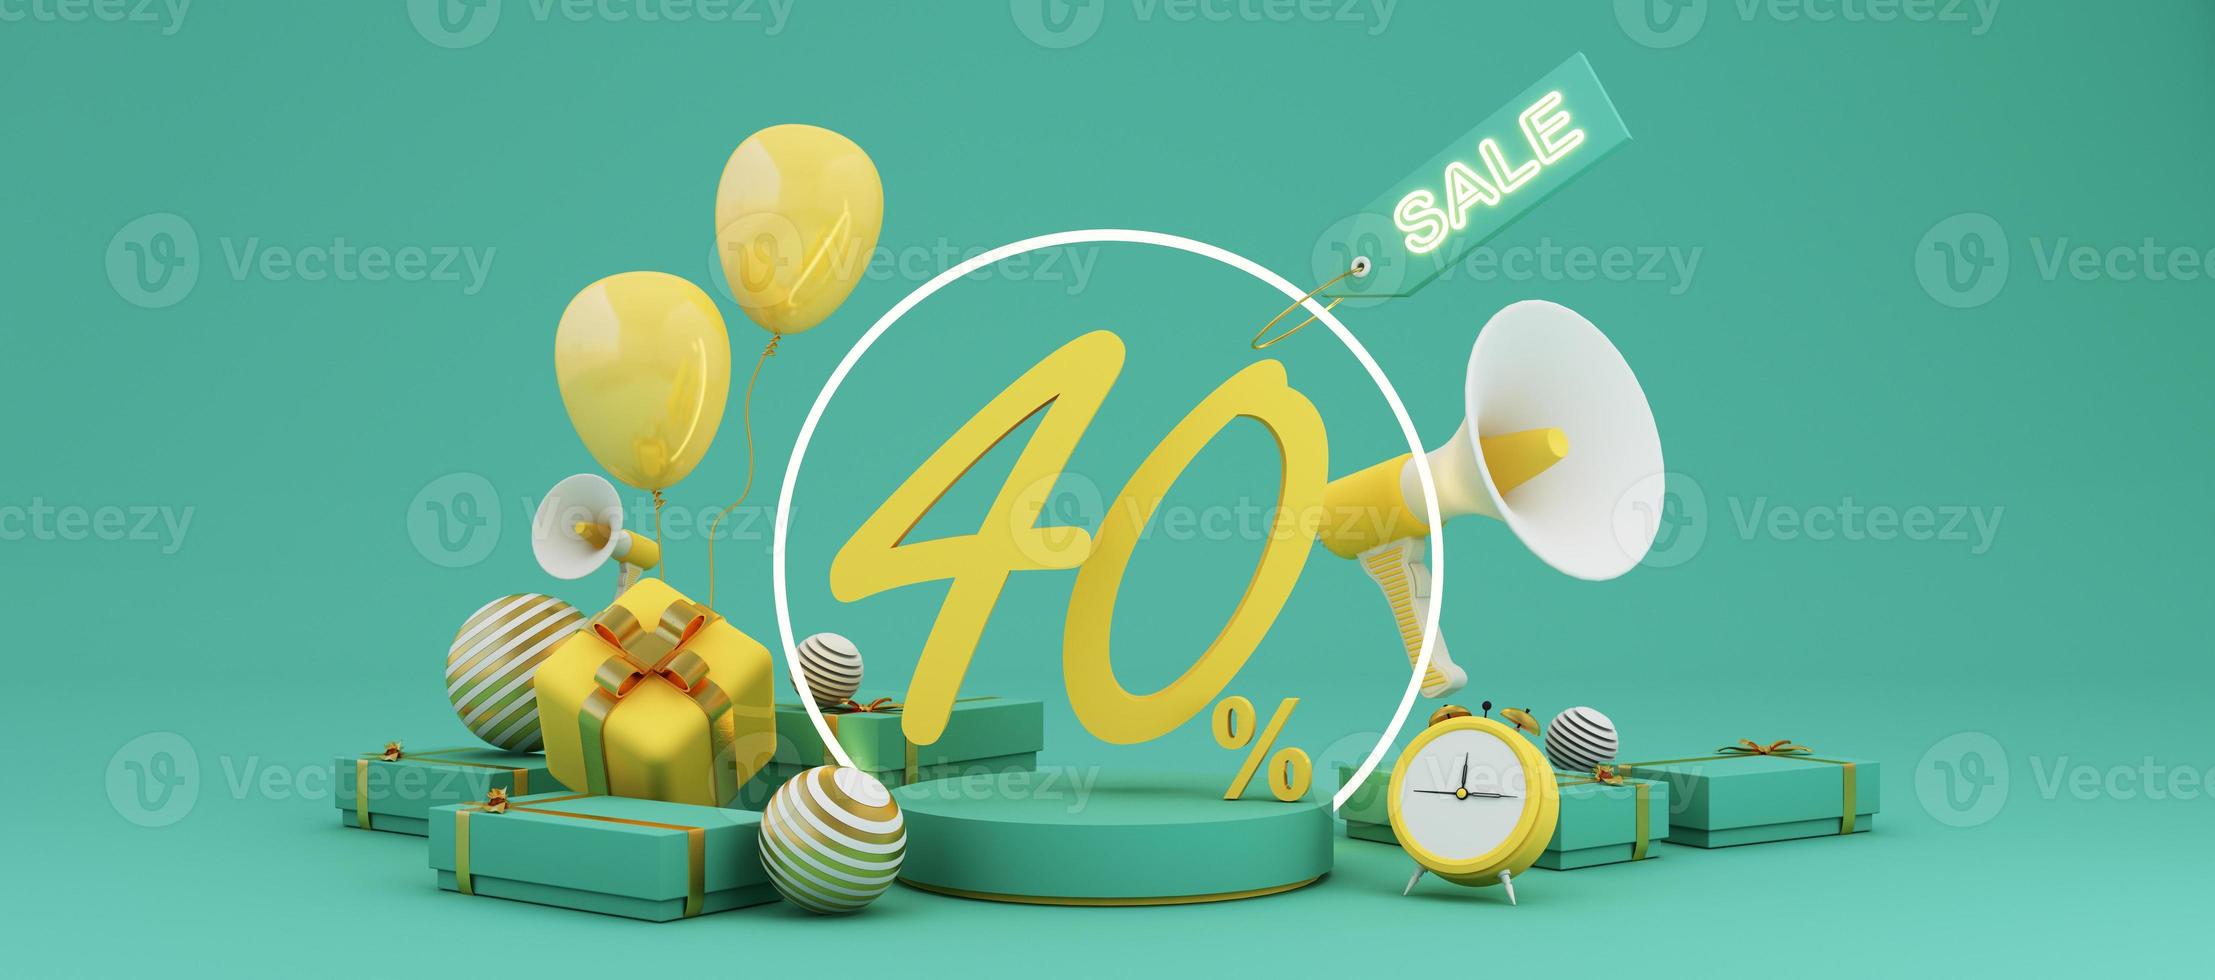 Great discount banner design with SALE text phrase on green and yellow background with gift box, shopping cart bag and alarm clock elements megaphone with product stand 3d rendering photo